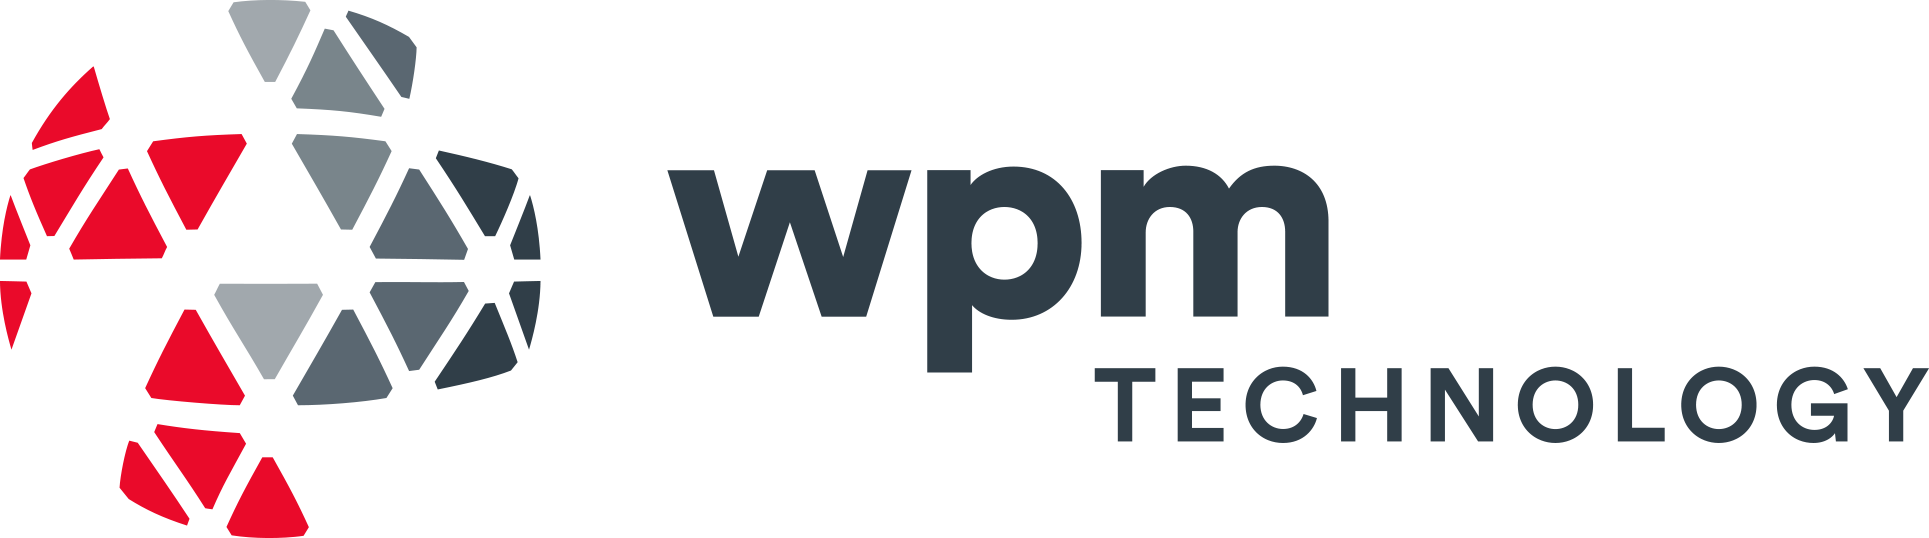 wpm technology 4color